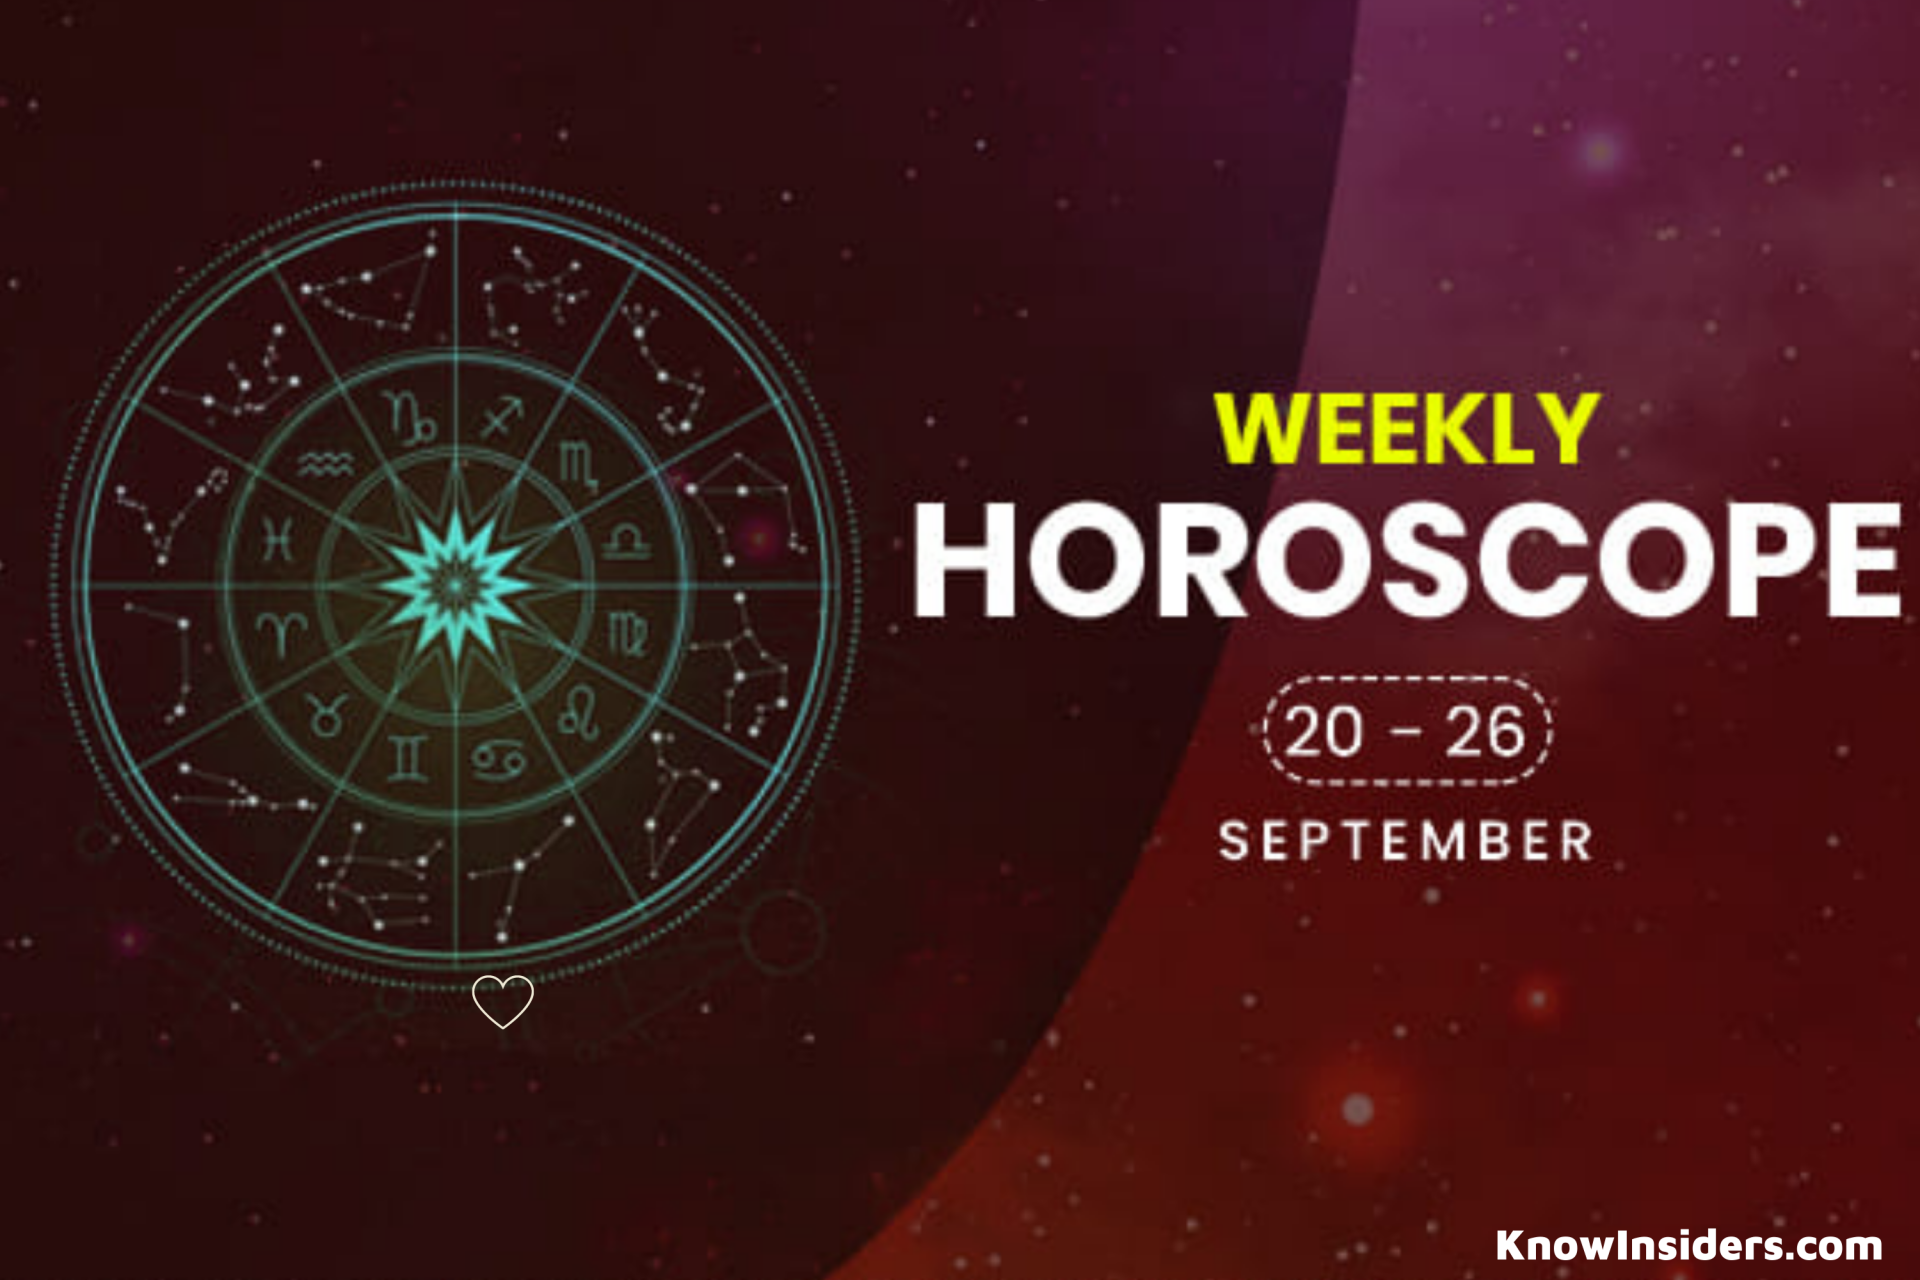 Your Weekly Horoscope 20 to 26 September 2021: Prediction for Each Zodiac Sign